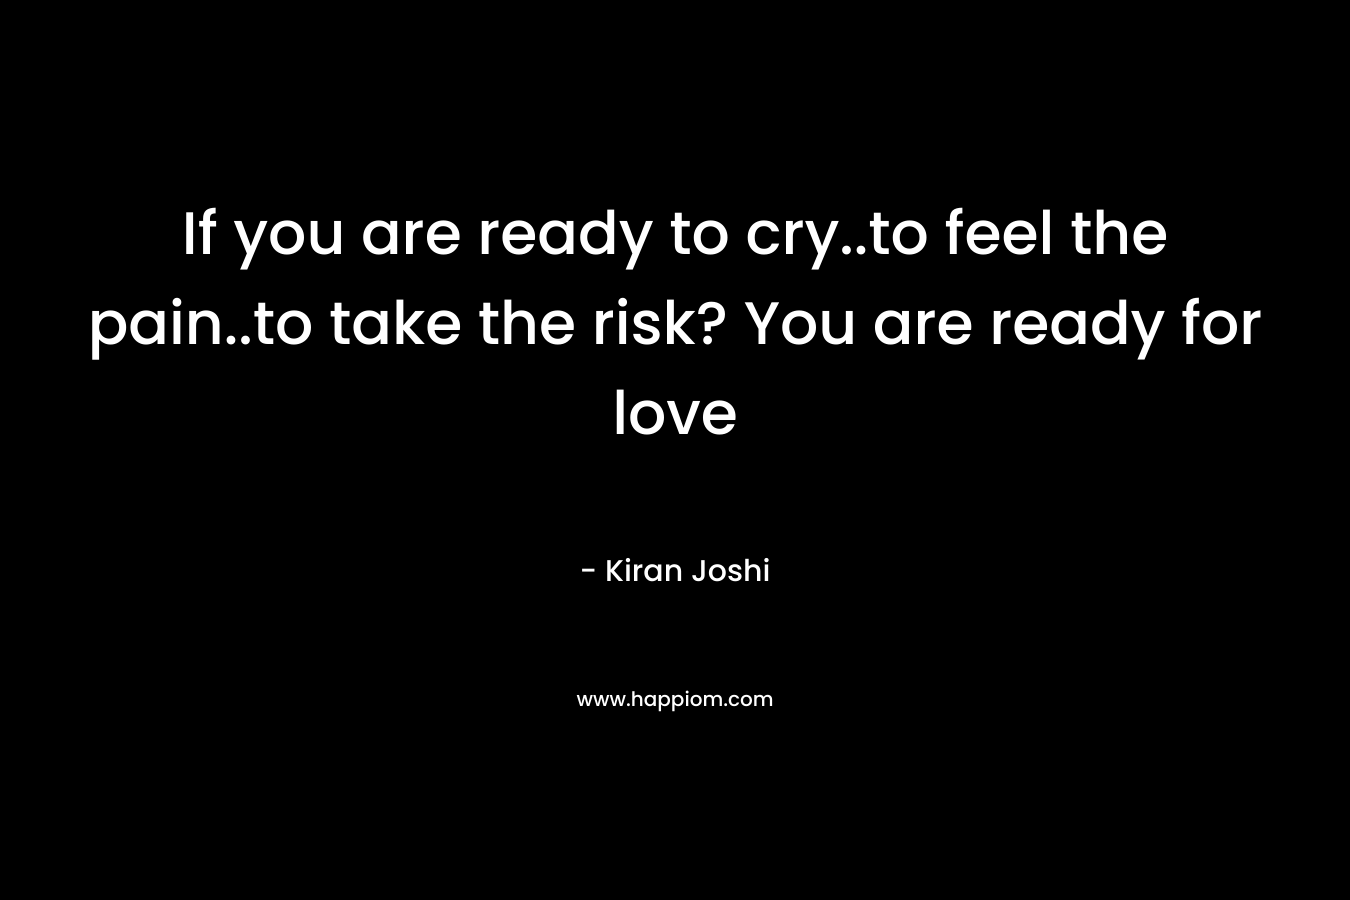 If you are ready to cry..to feel the pain..to take the risk? You are ready for love